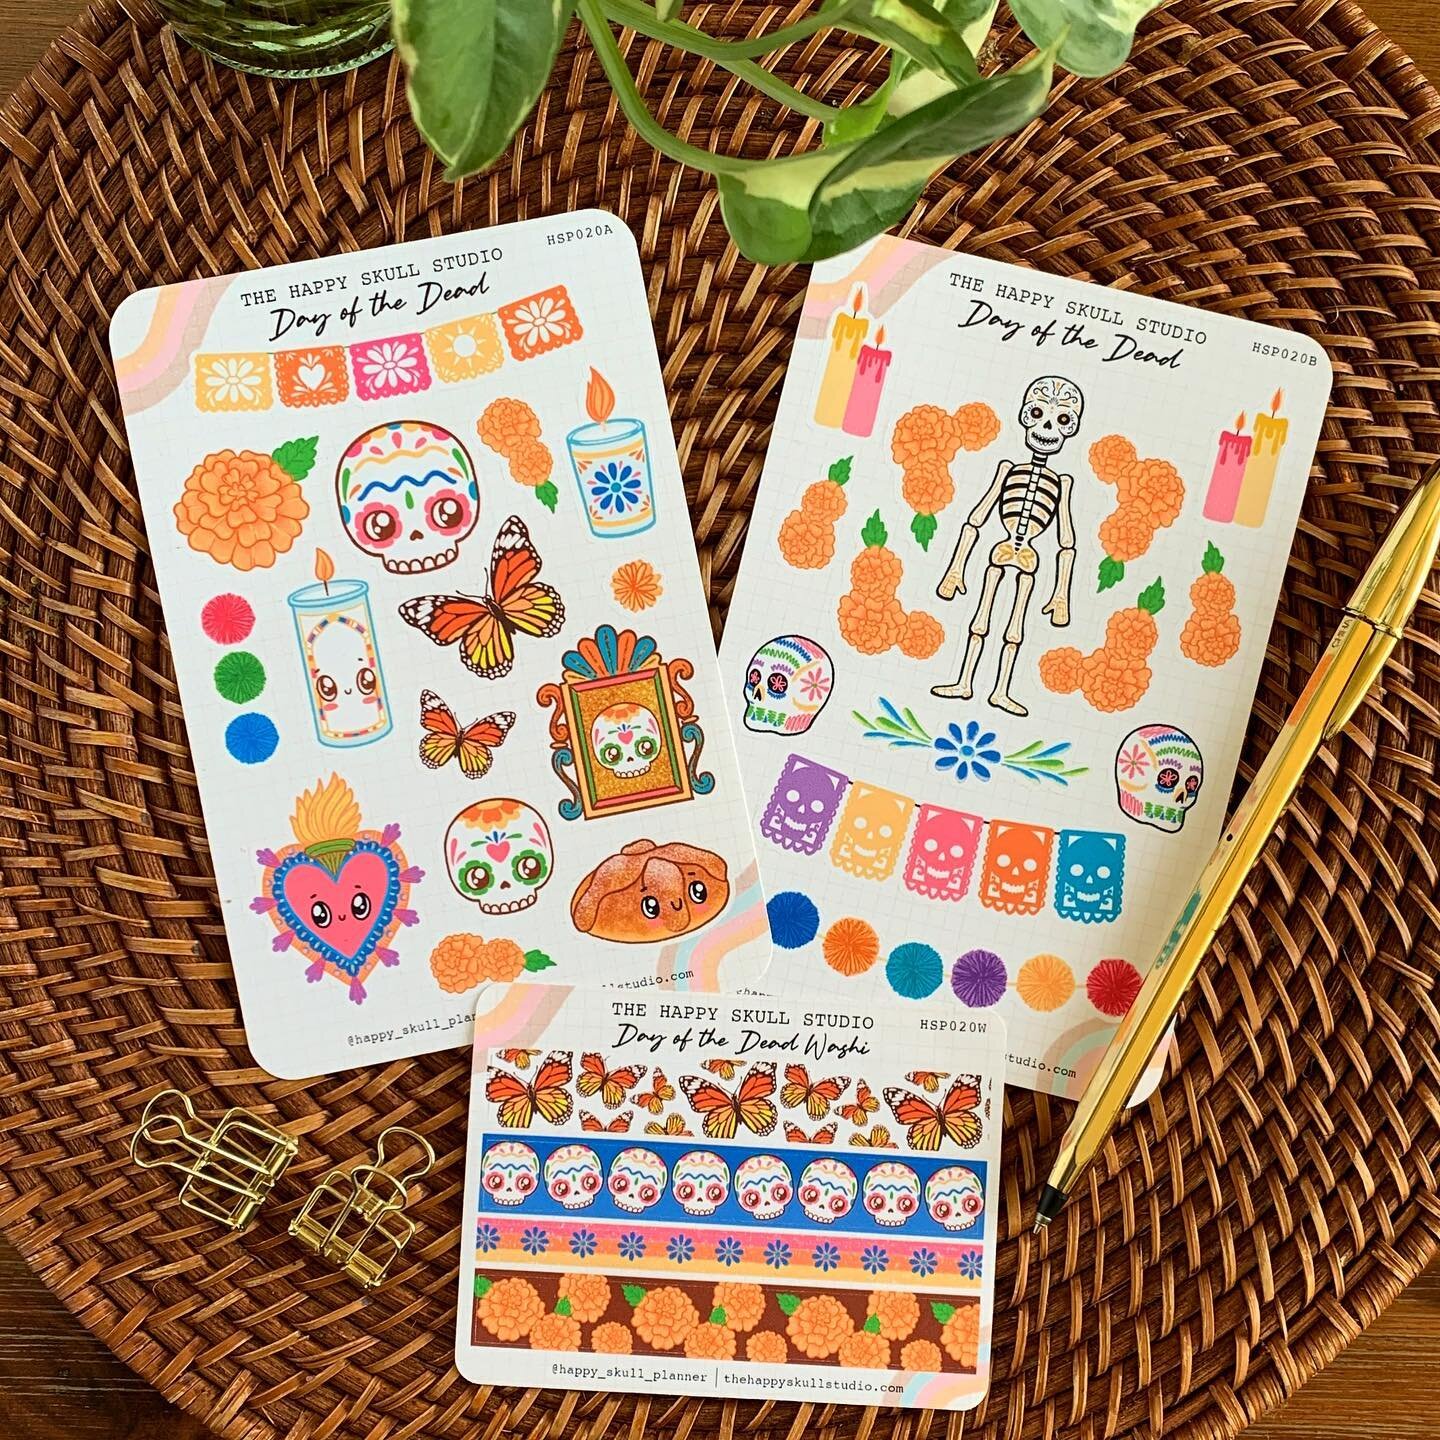 I have two new, sticker sheet collections in my shop now. Can&rsquo;t decide which one I love more. ✨Link in Bio✨#thehappyskullstudio  #happyskullplanner
.
.
.
.
#stickersheet #planneraddict #plannercommunity #plannernerd #bulletjournal #bulletjourna